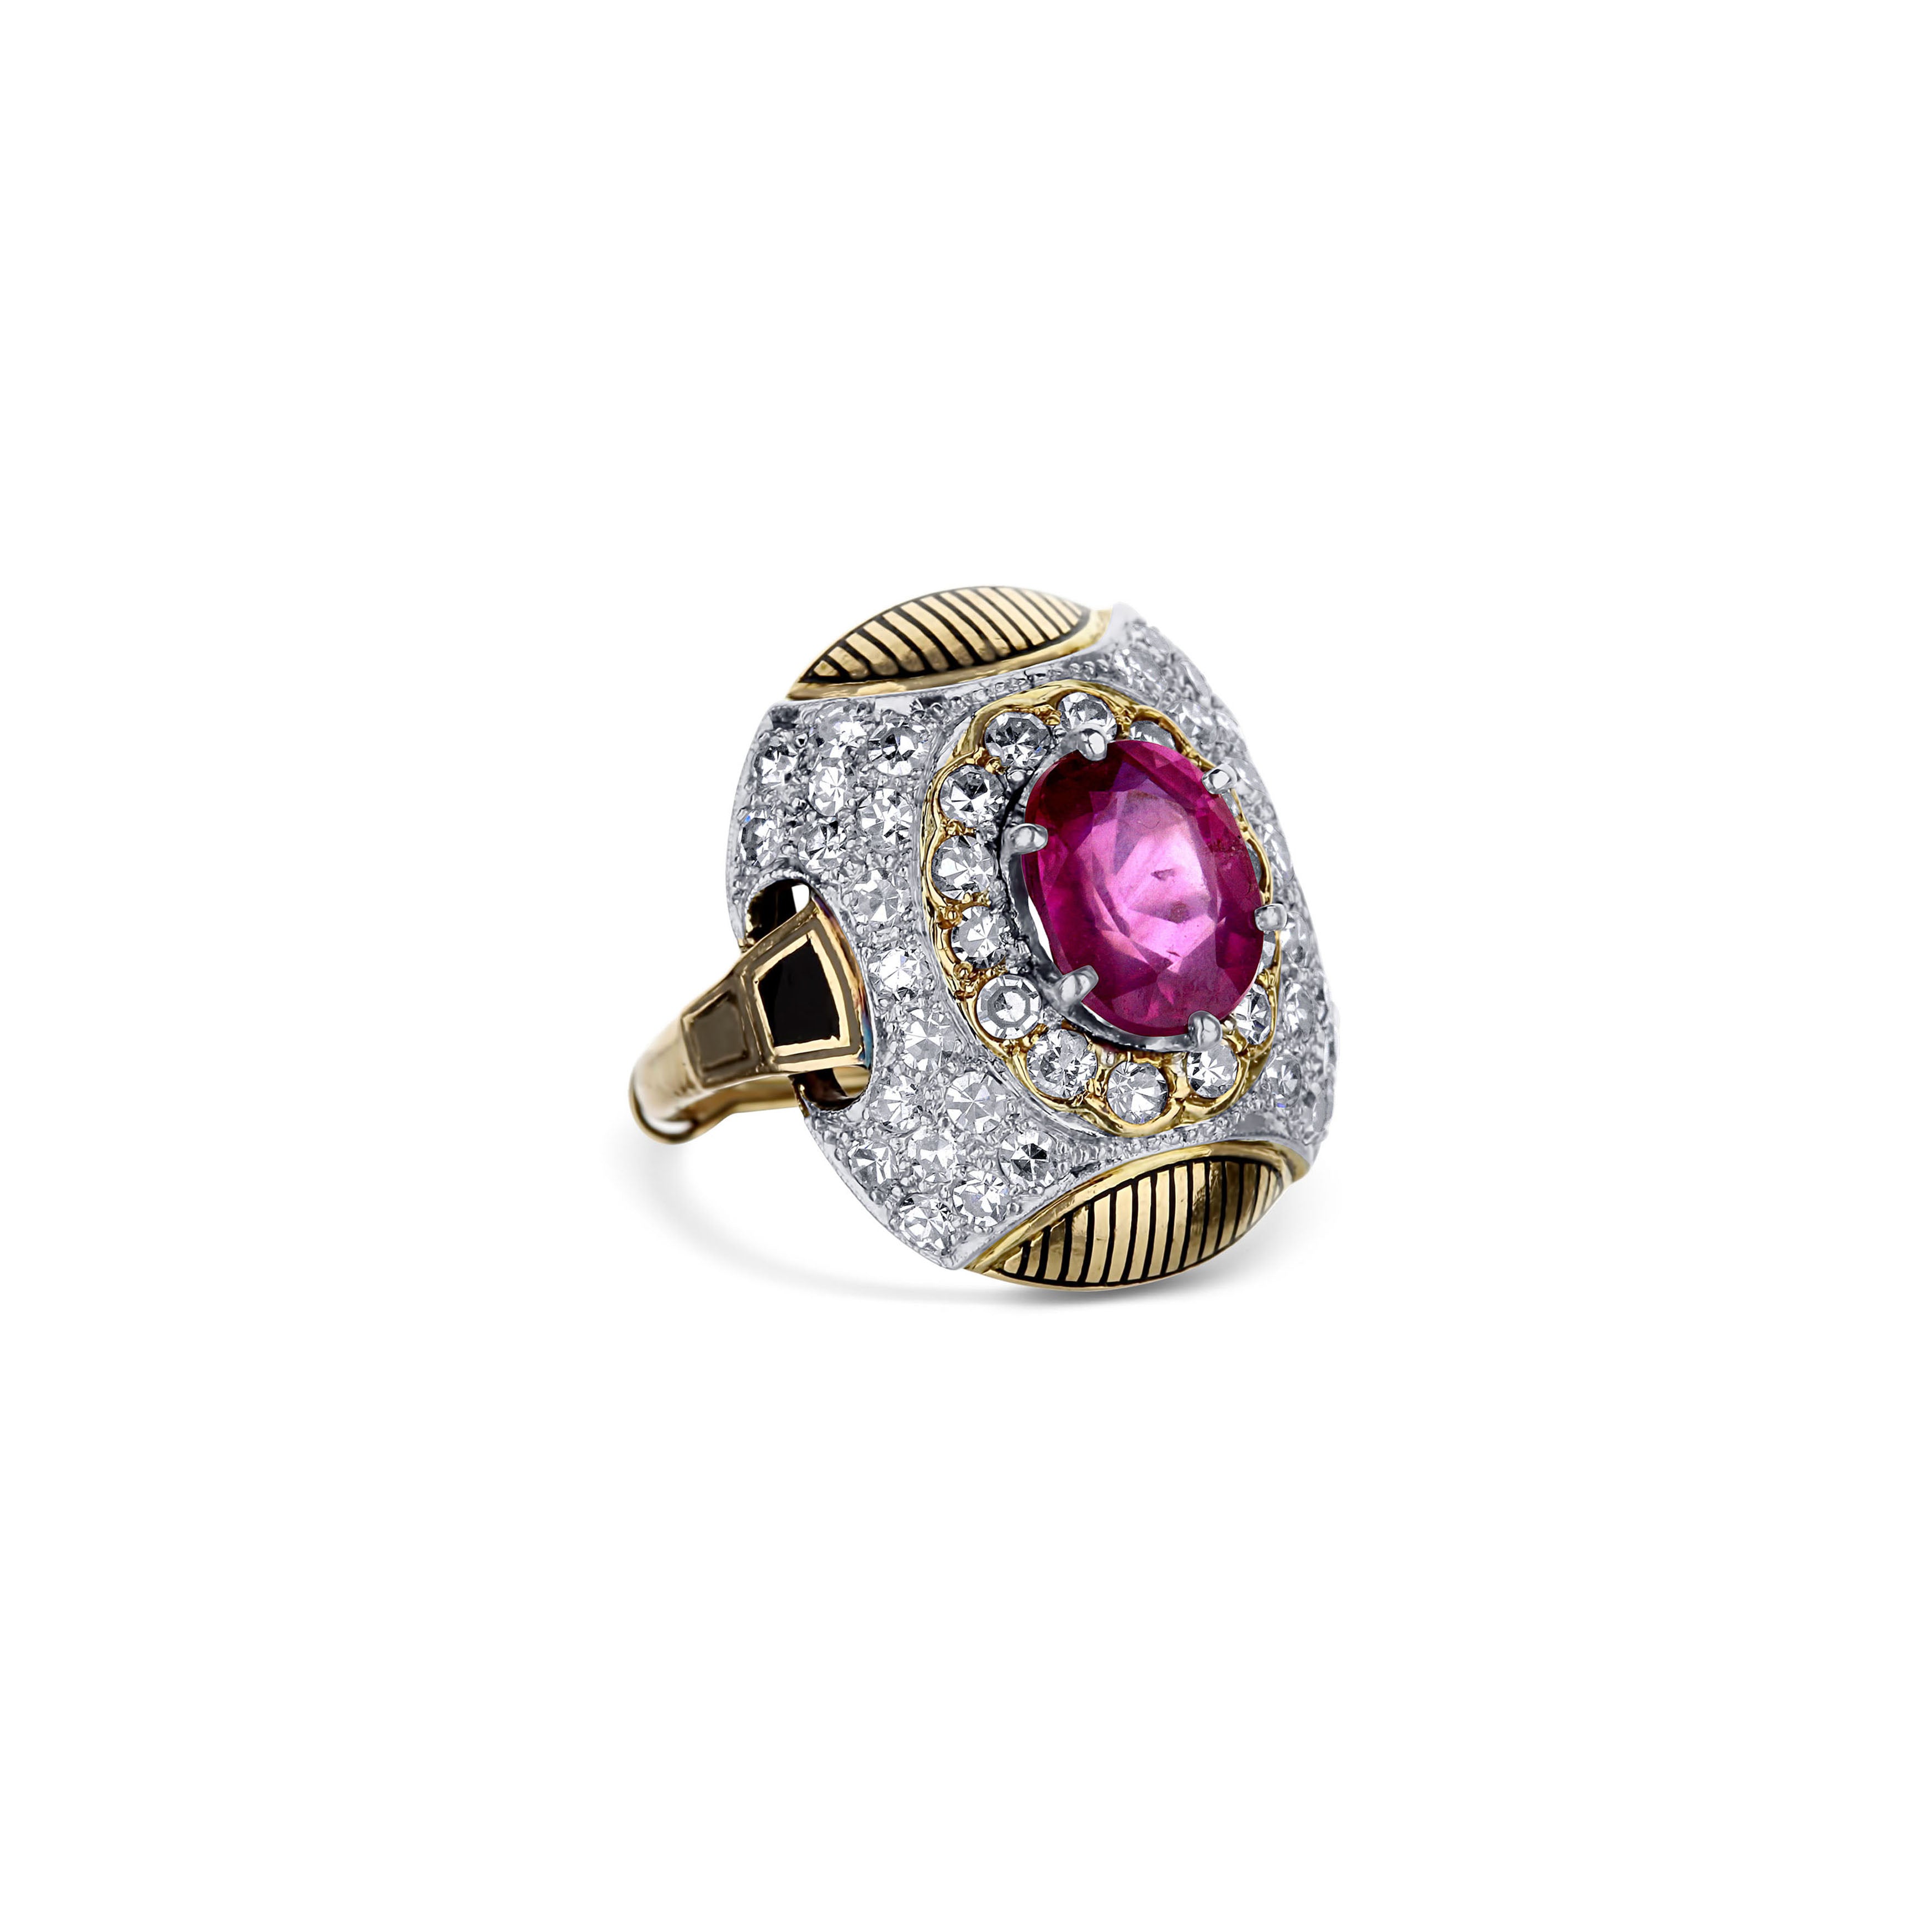 Vintage 18K Gold Domed Art Deco Style Ring With Ruby And Diamonds